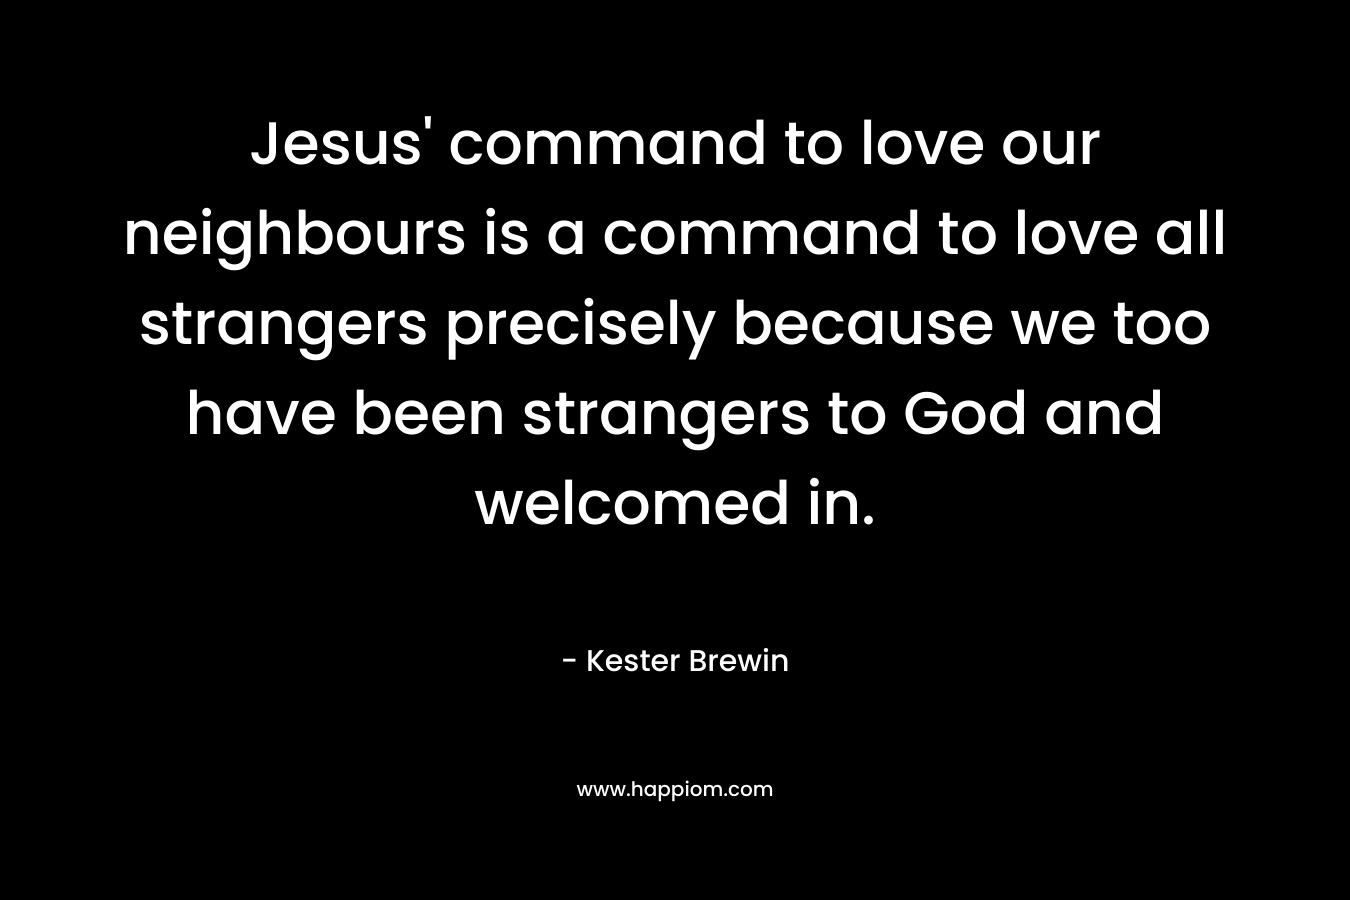 Jesus’ command to love our neighbours is a command to love all strangers precisely because we too have been strangers to God and welcomed in. – Kester Brewin